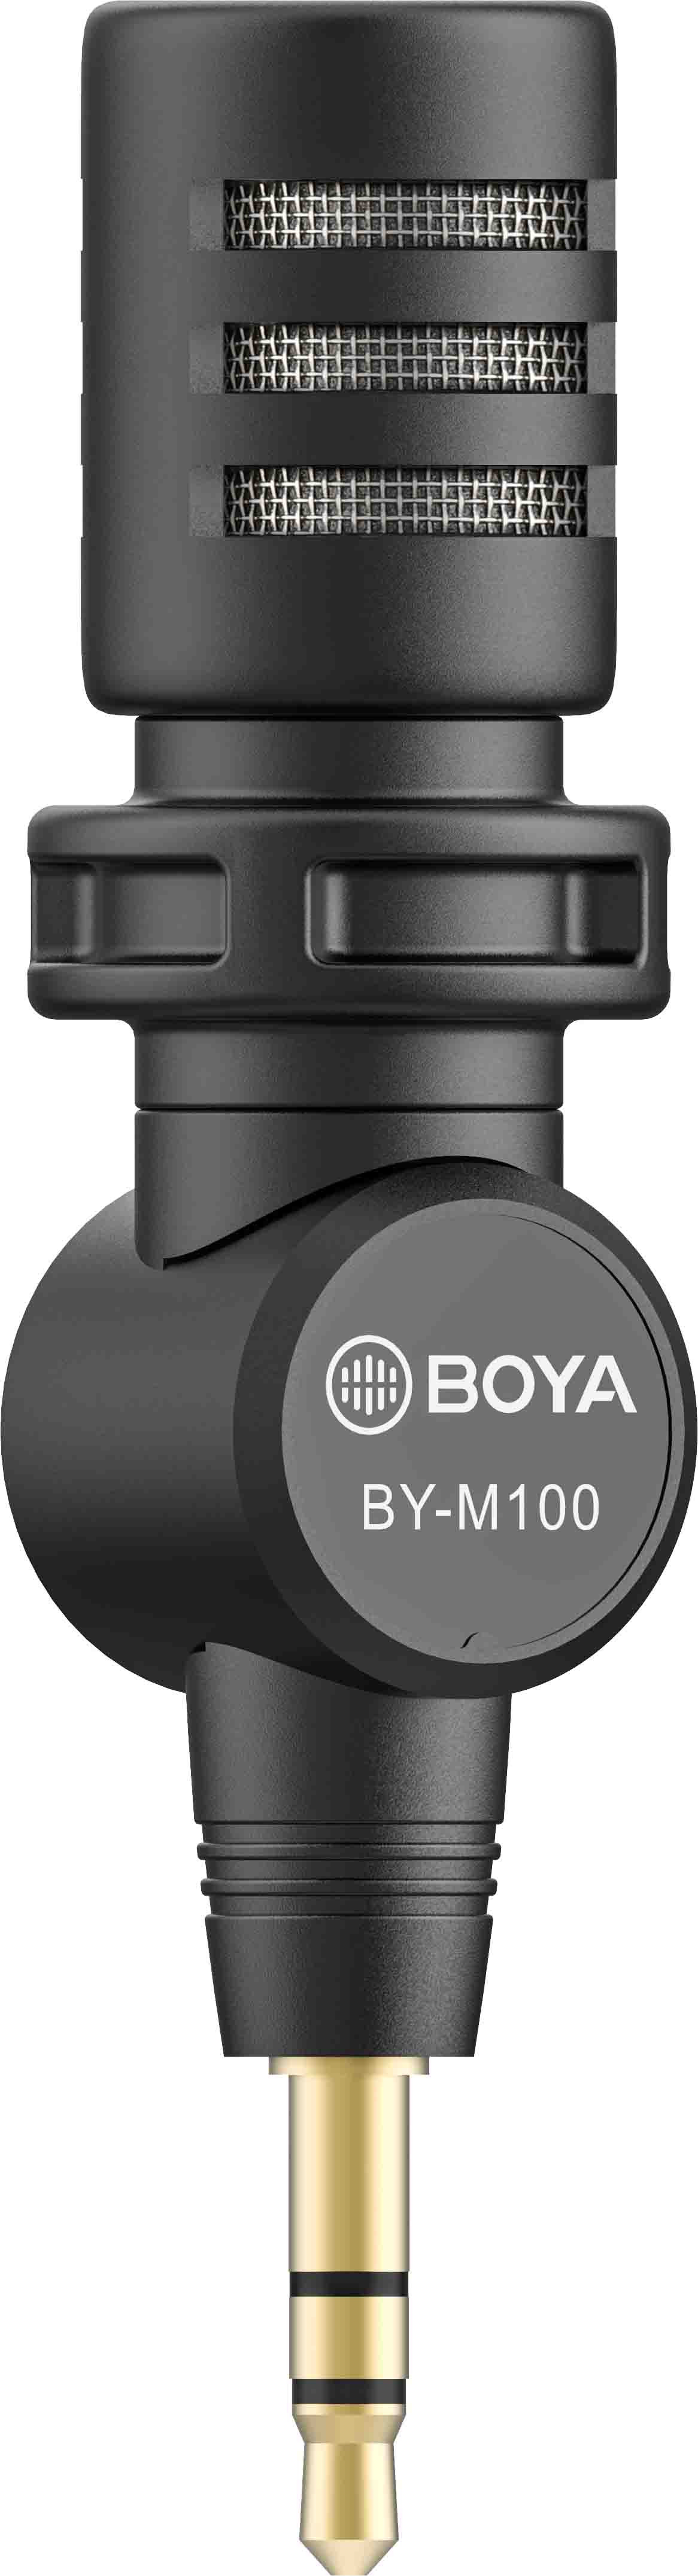 Boya plug and play microphone -for dslr, camcorder, recorder Mikrofons